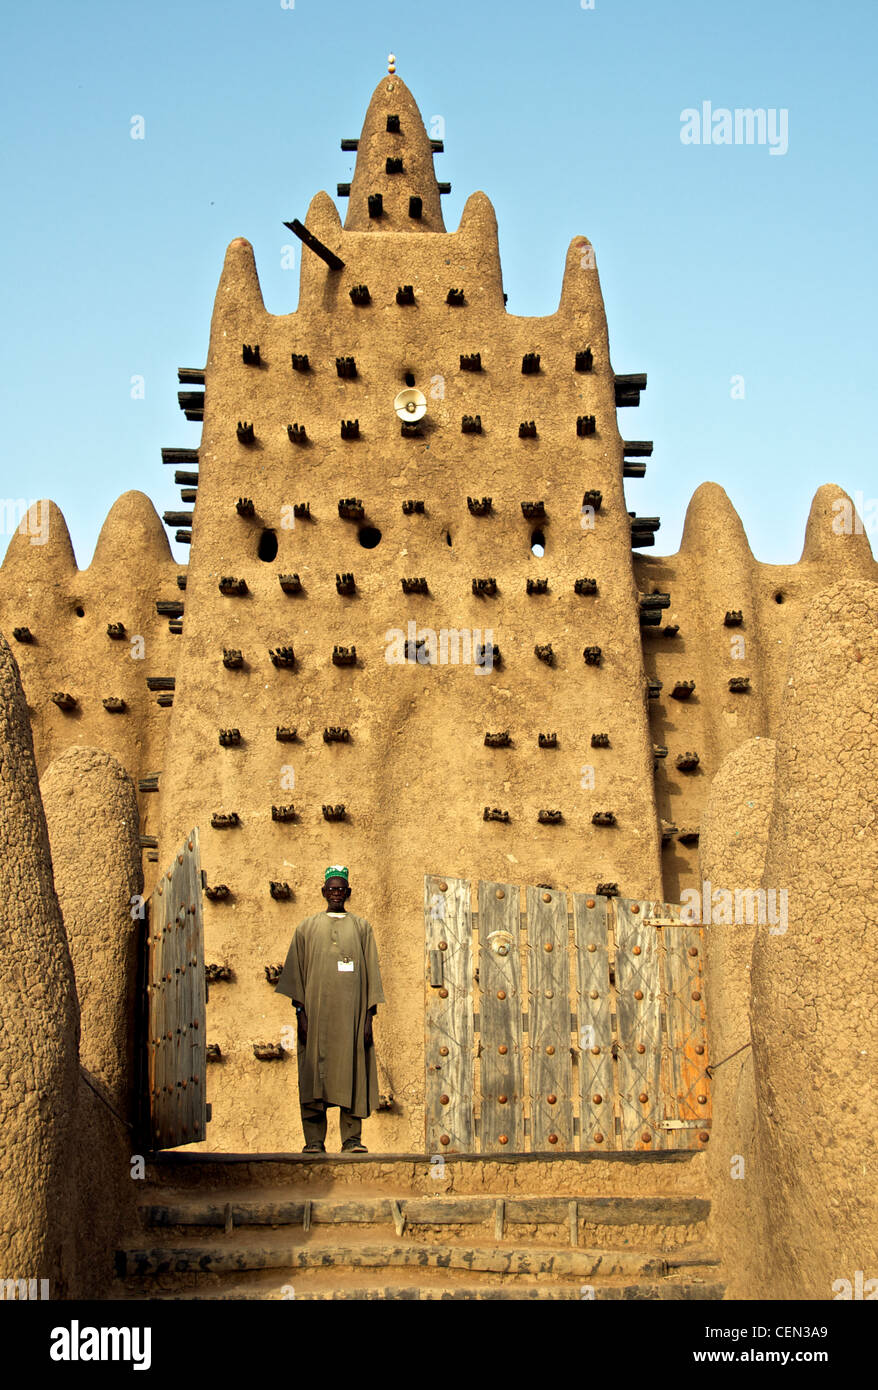 A man standing in front of the Great Mosque of Djenne in Djenne, Mali. Stock Photo